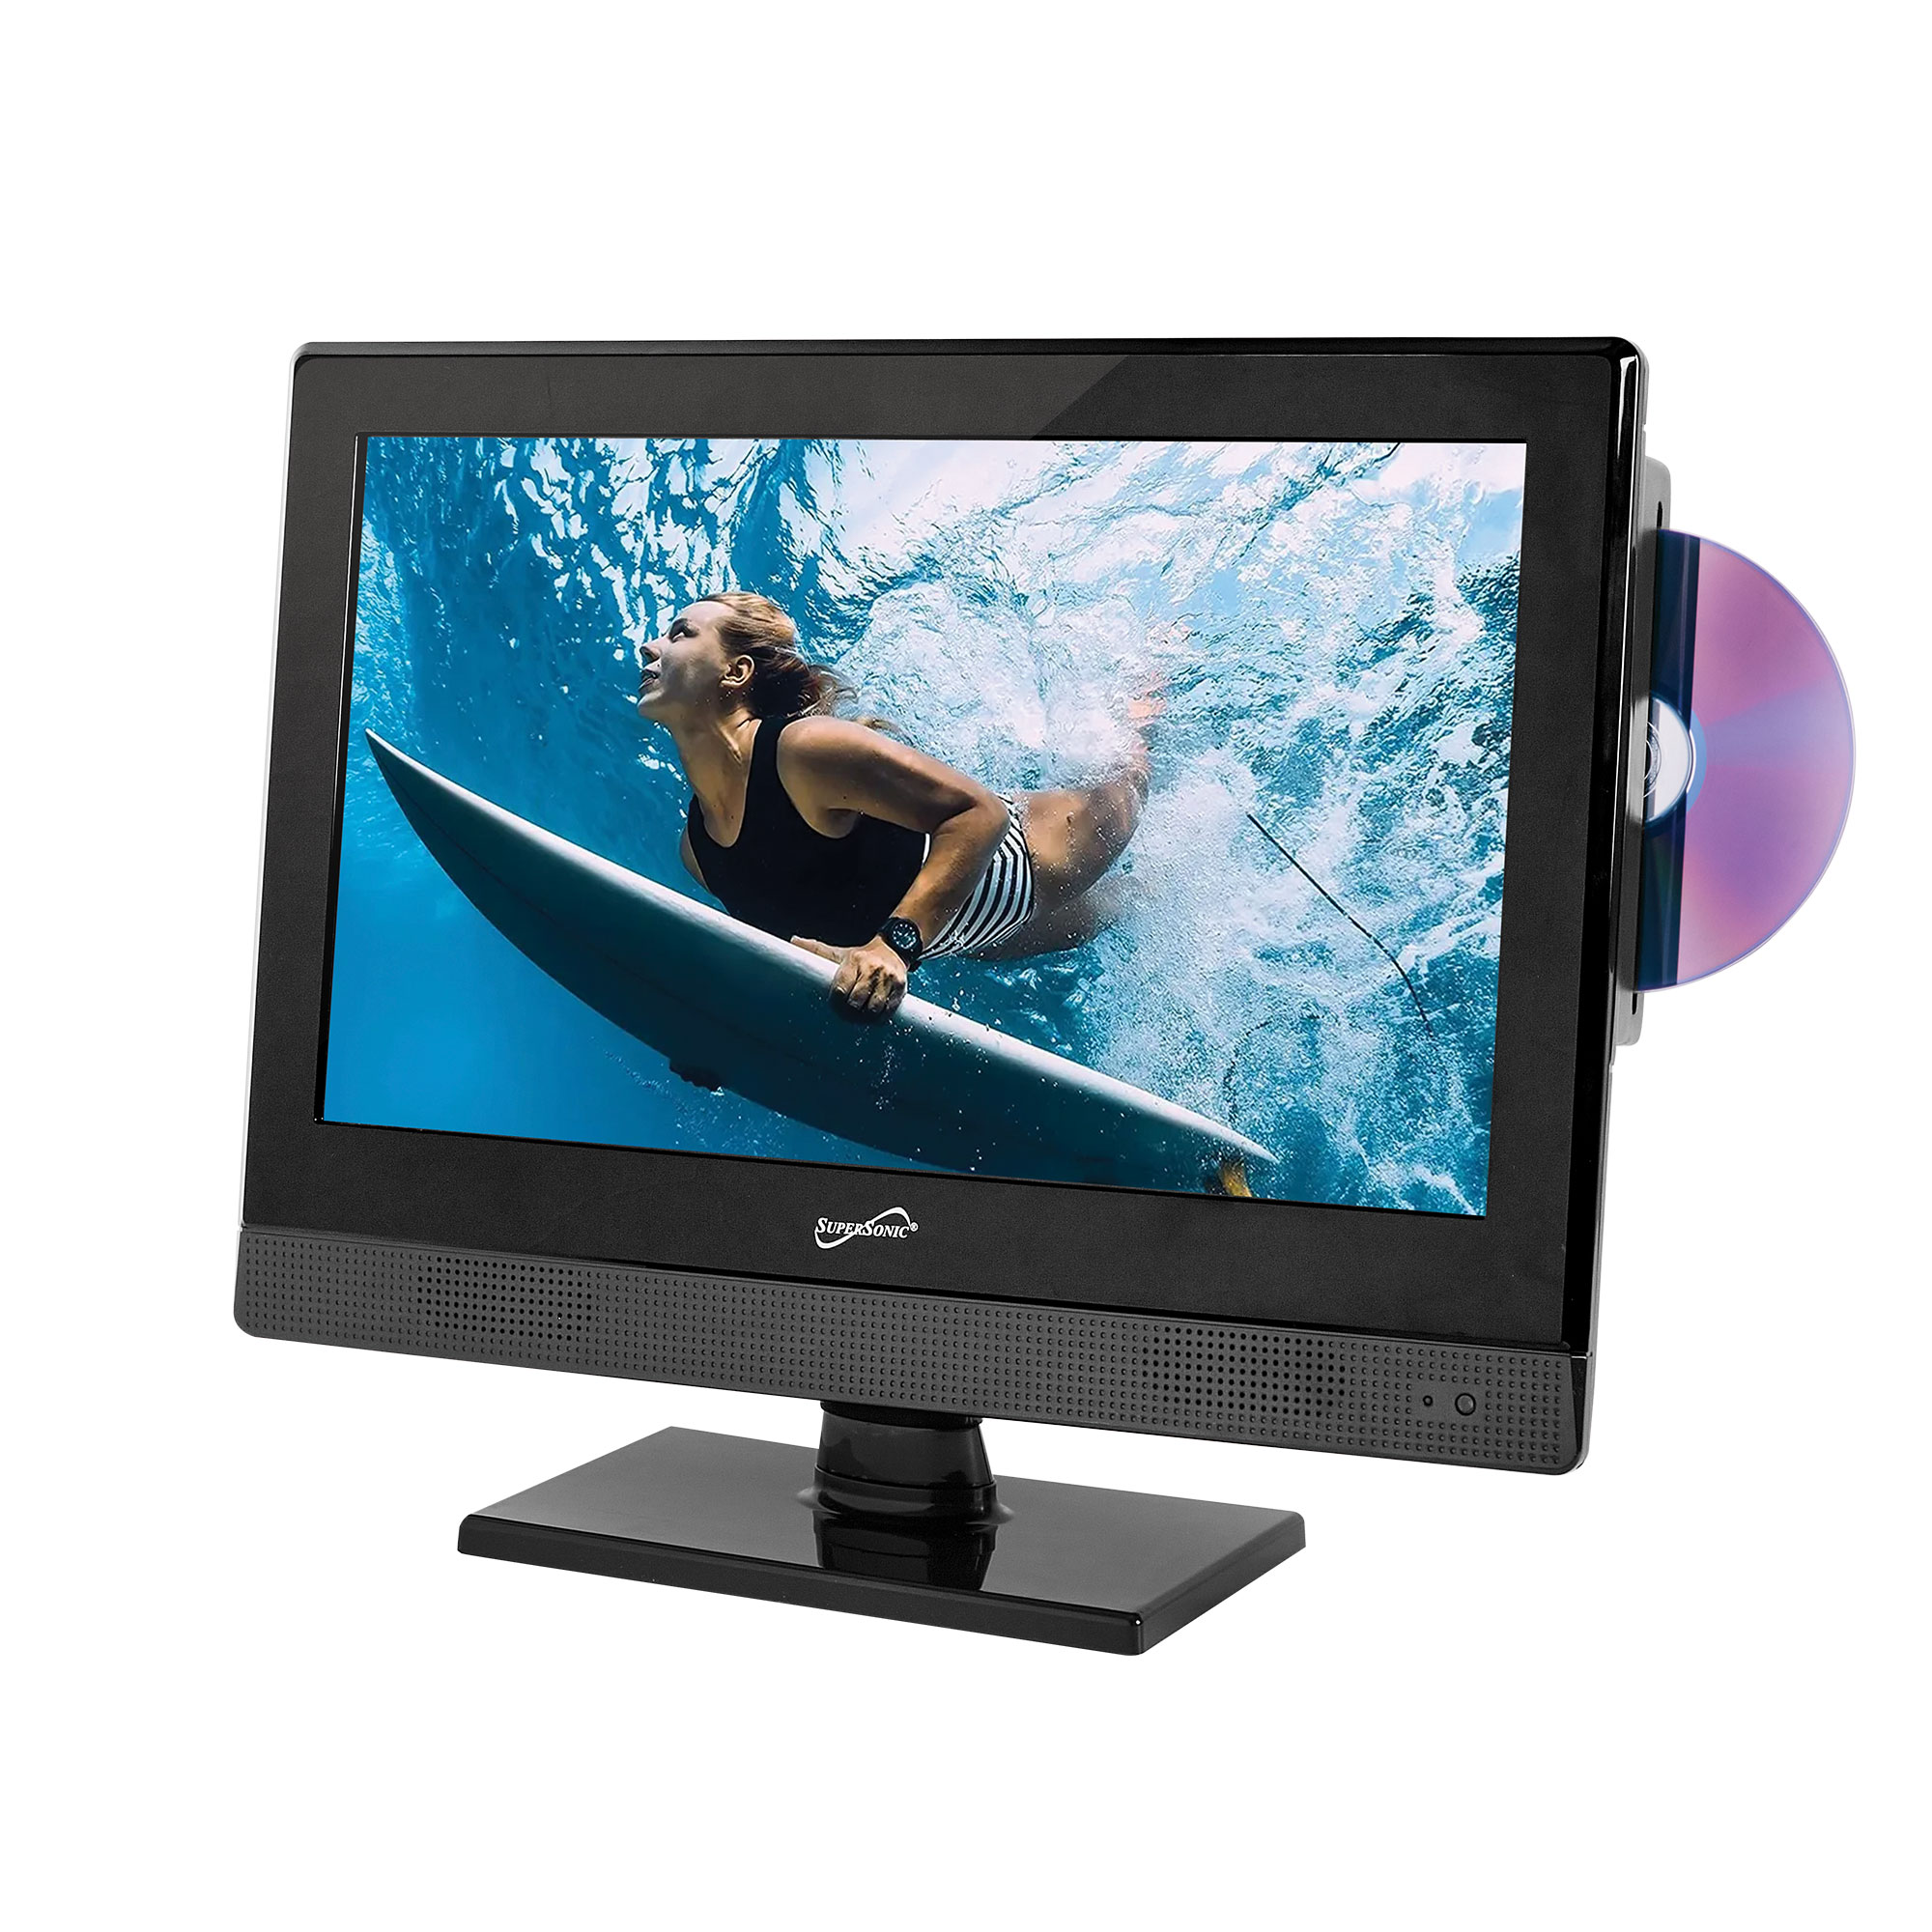 Supersonic 15.6" AC/DC HDTV with DVD